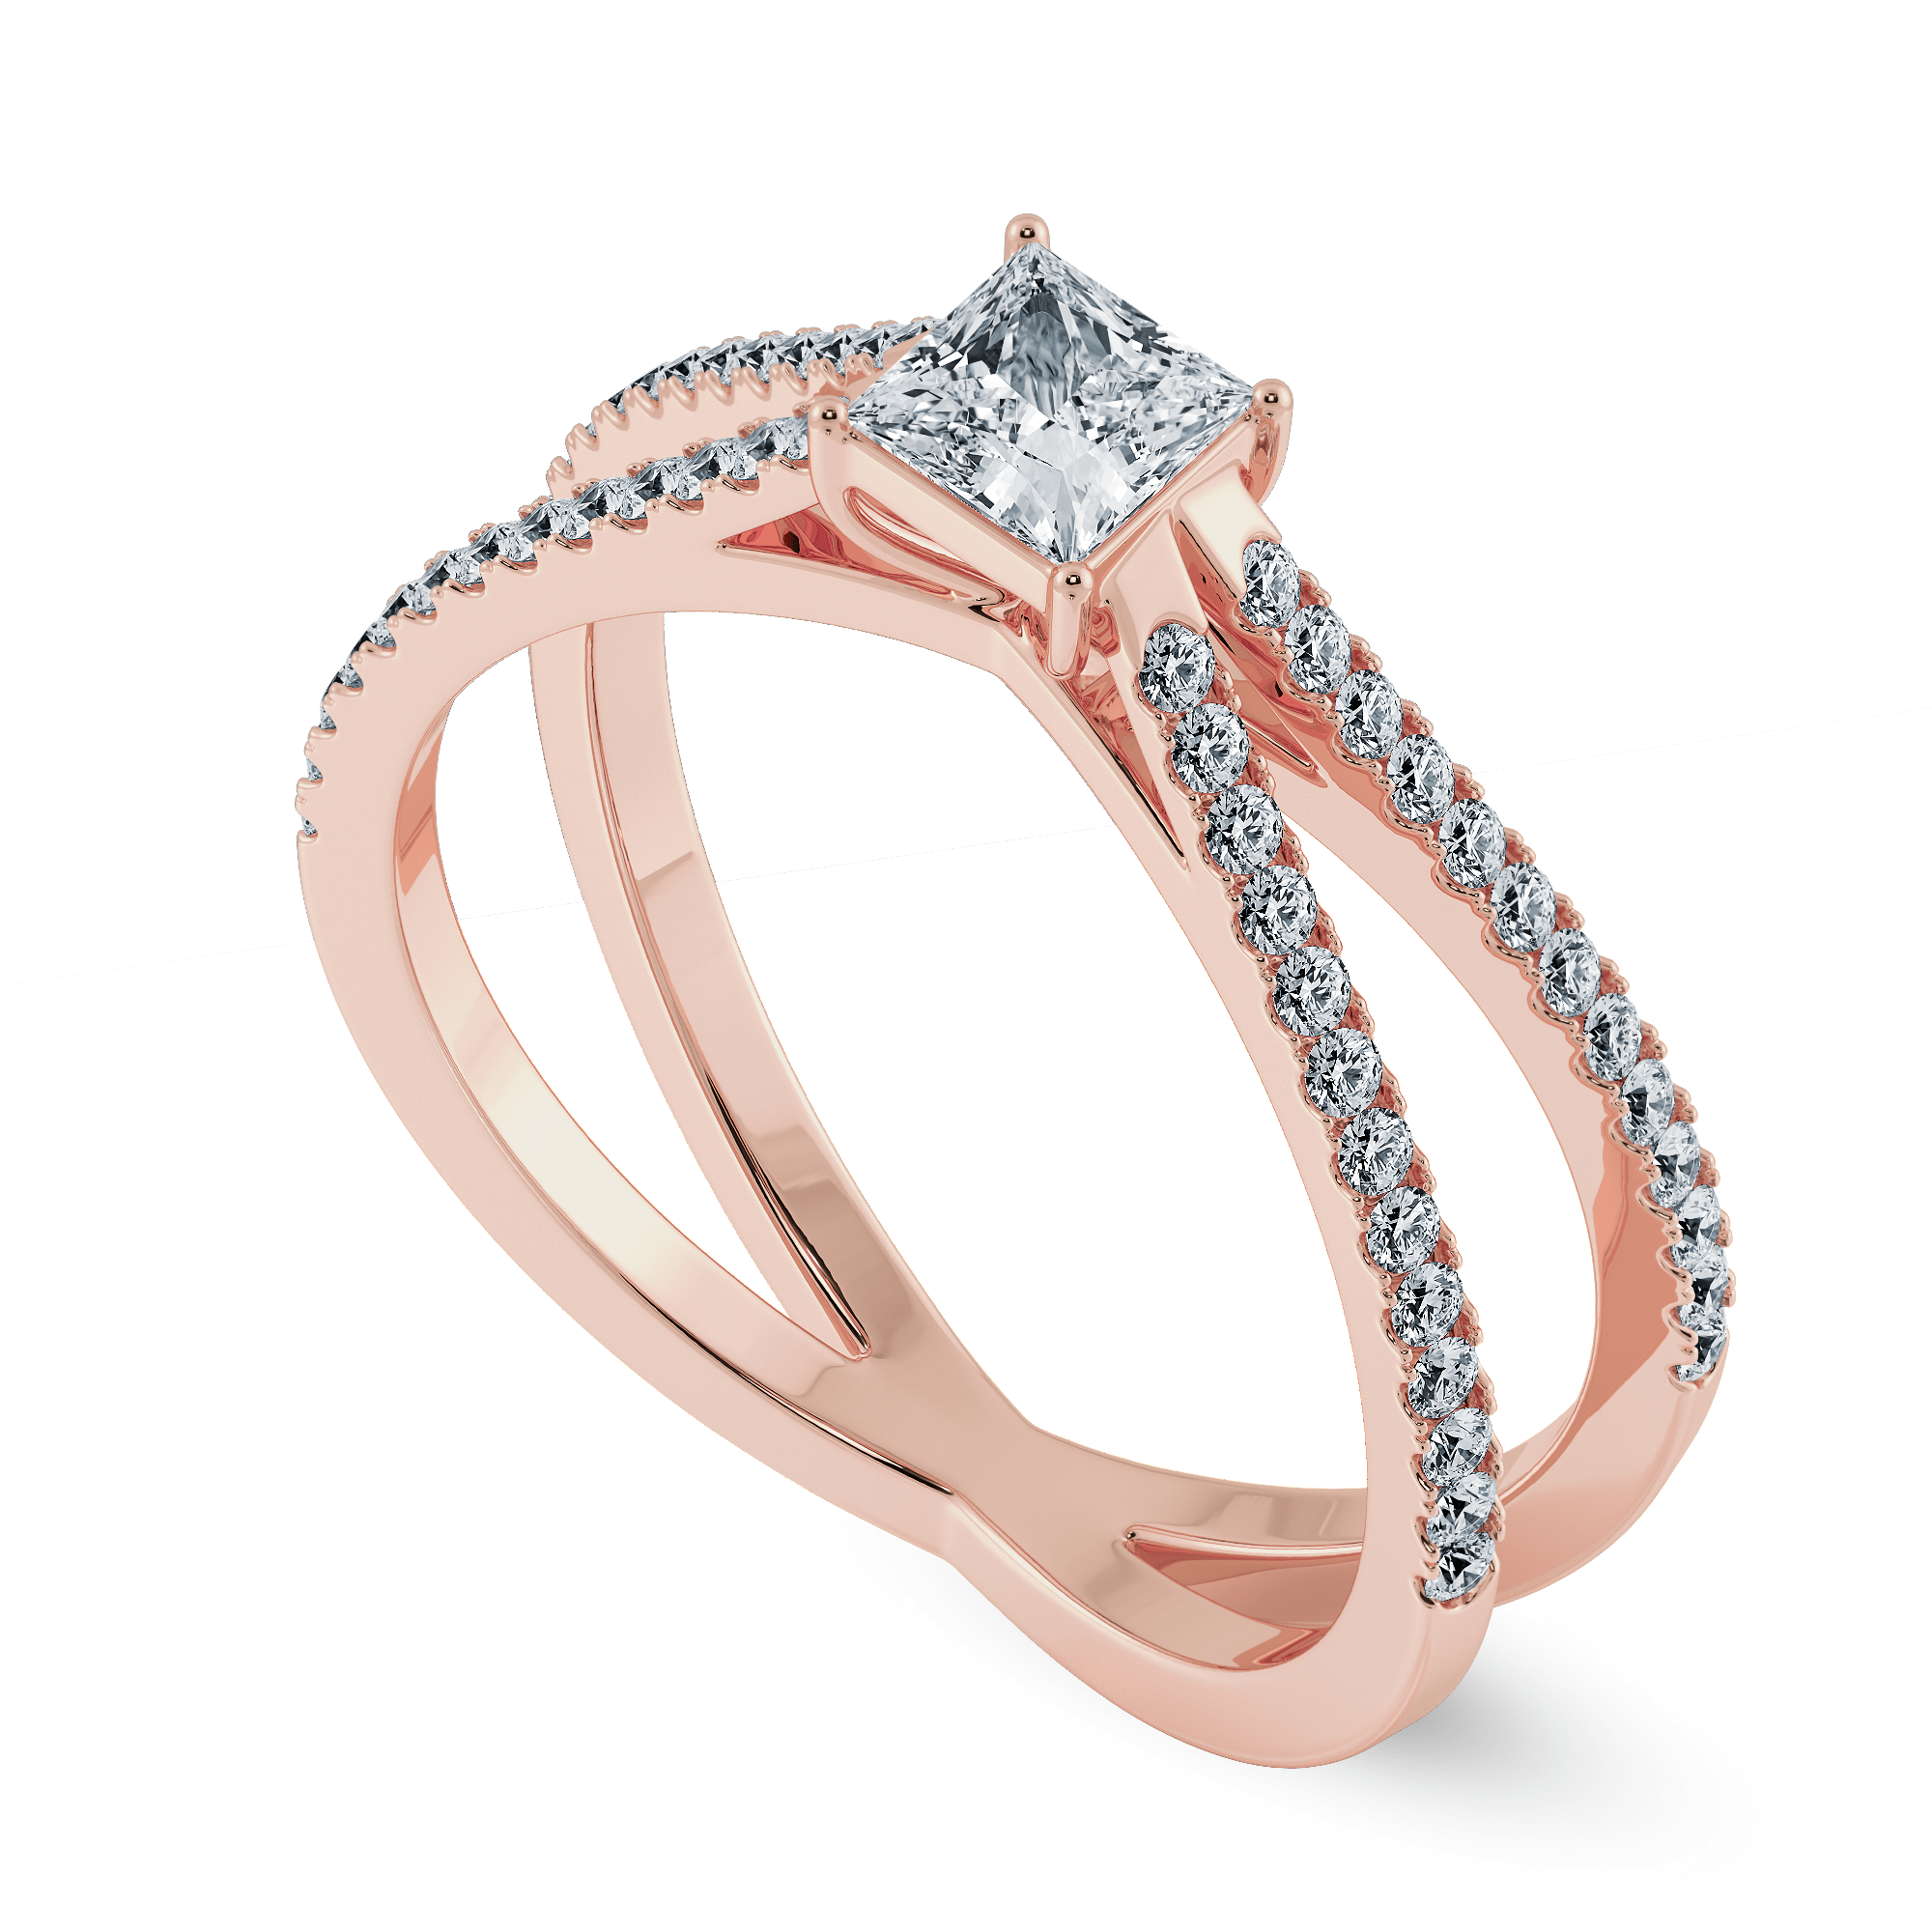 1.25 ct - Square Moissanite - Double Halo - Twisted Band - Vintage Inspired  - Pave - Wedding Ring Set in 18K Rose Gold over Silver - Walmart.com